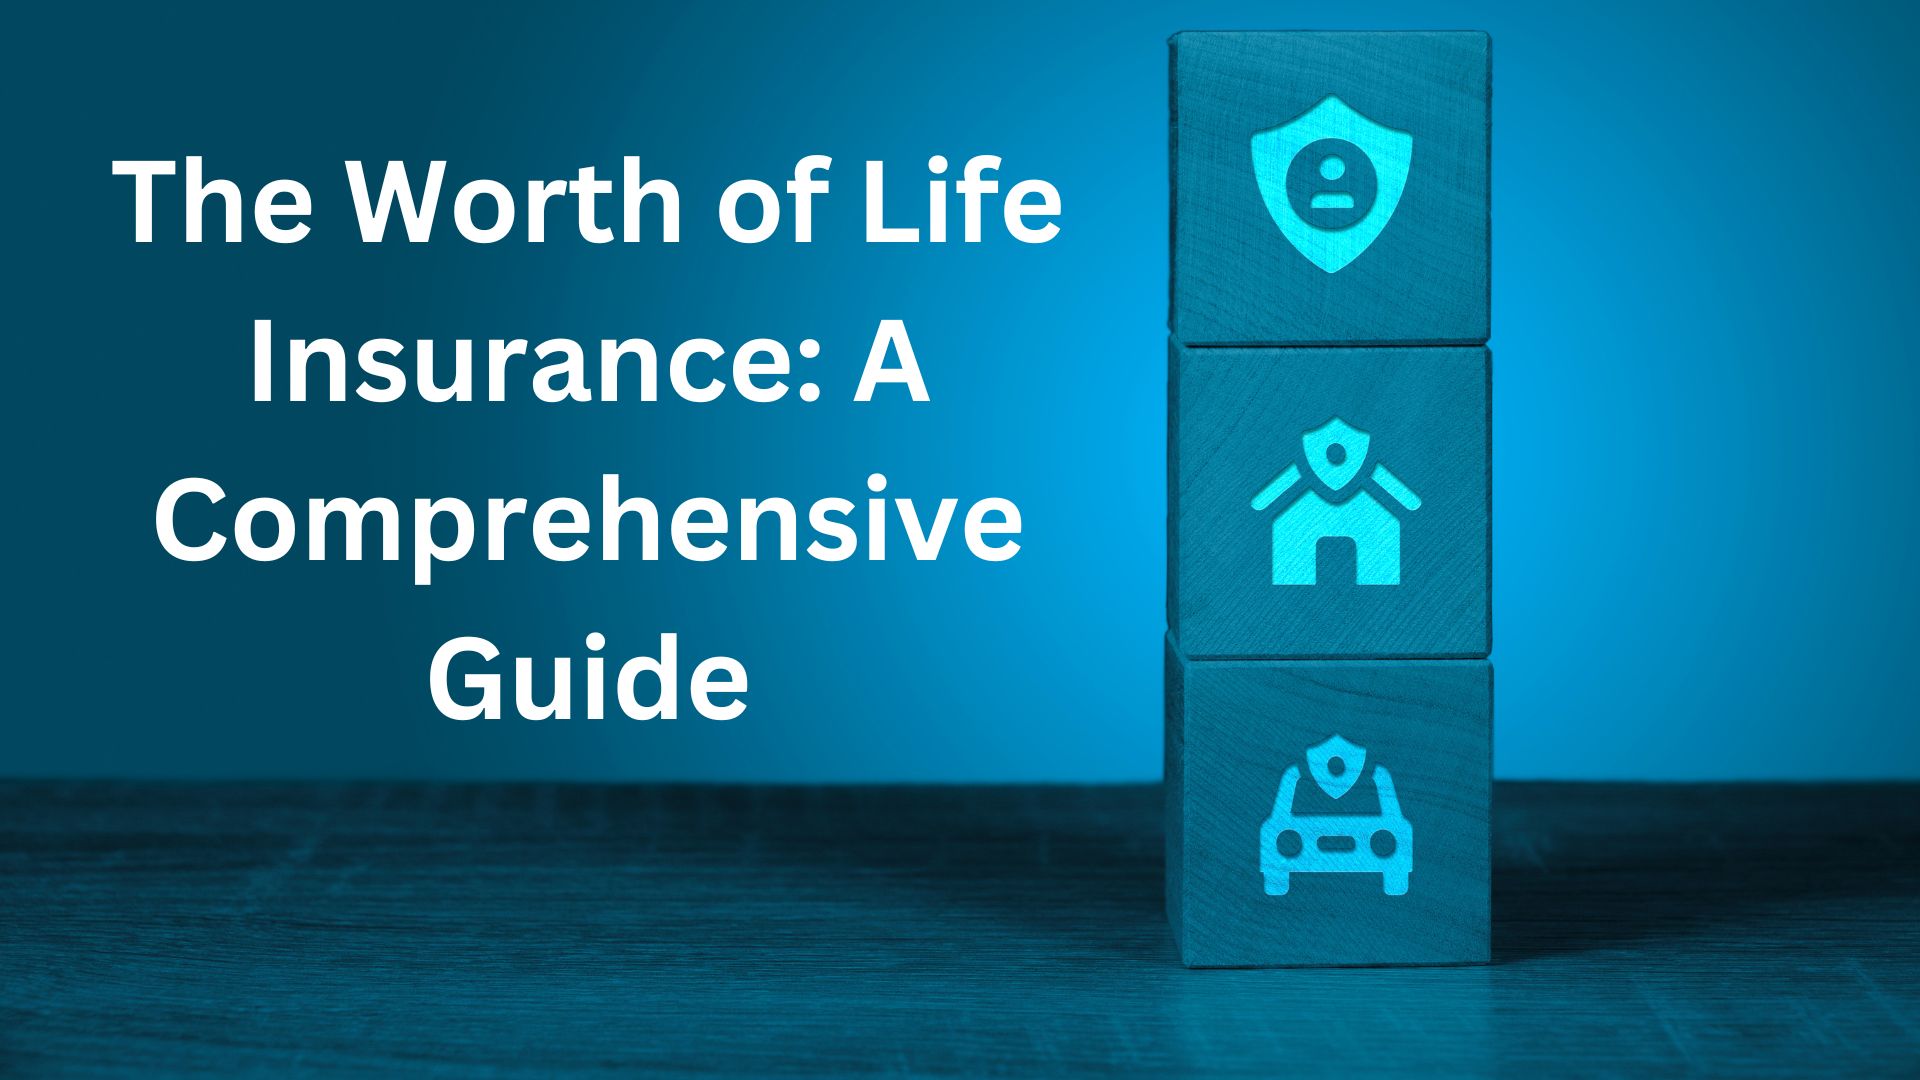 The Worth of Life Insurance: A Comprehensive Guide